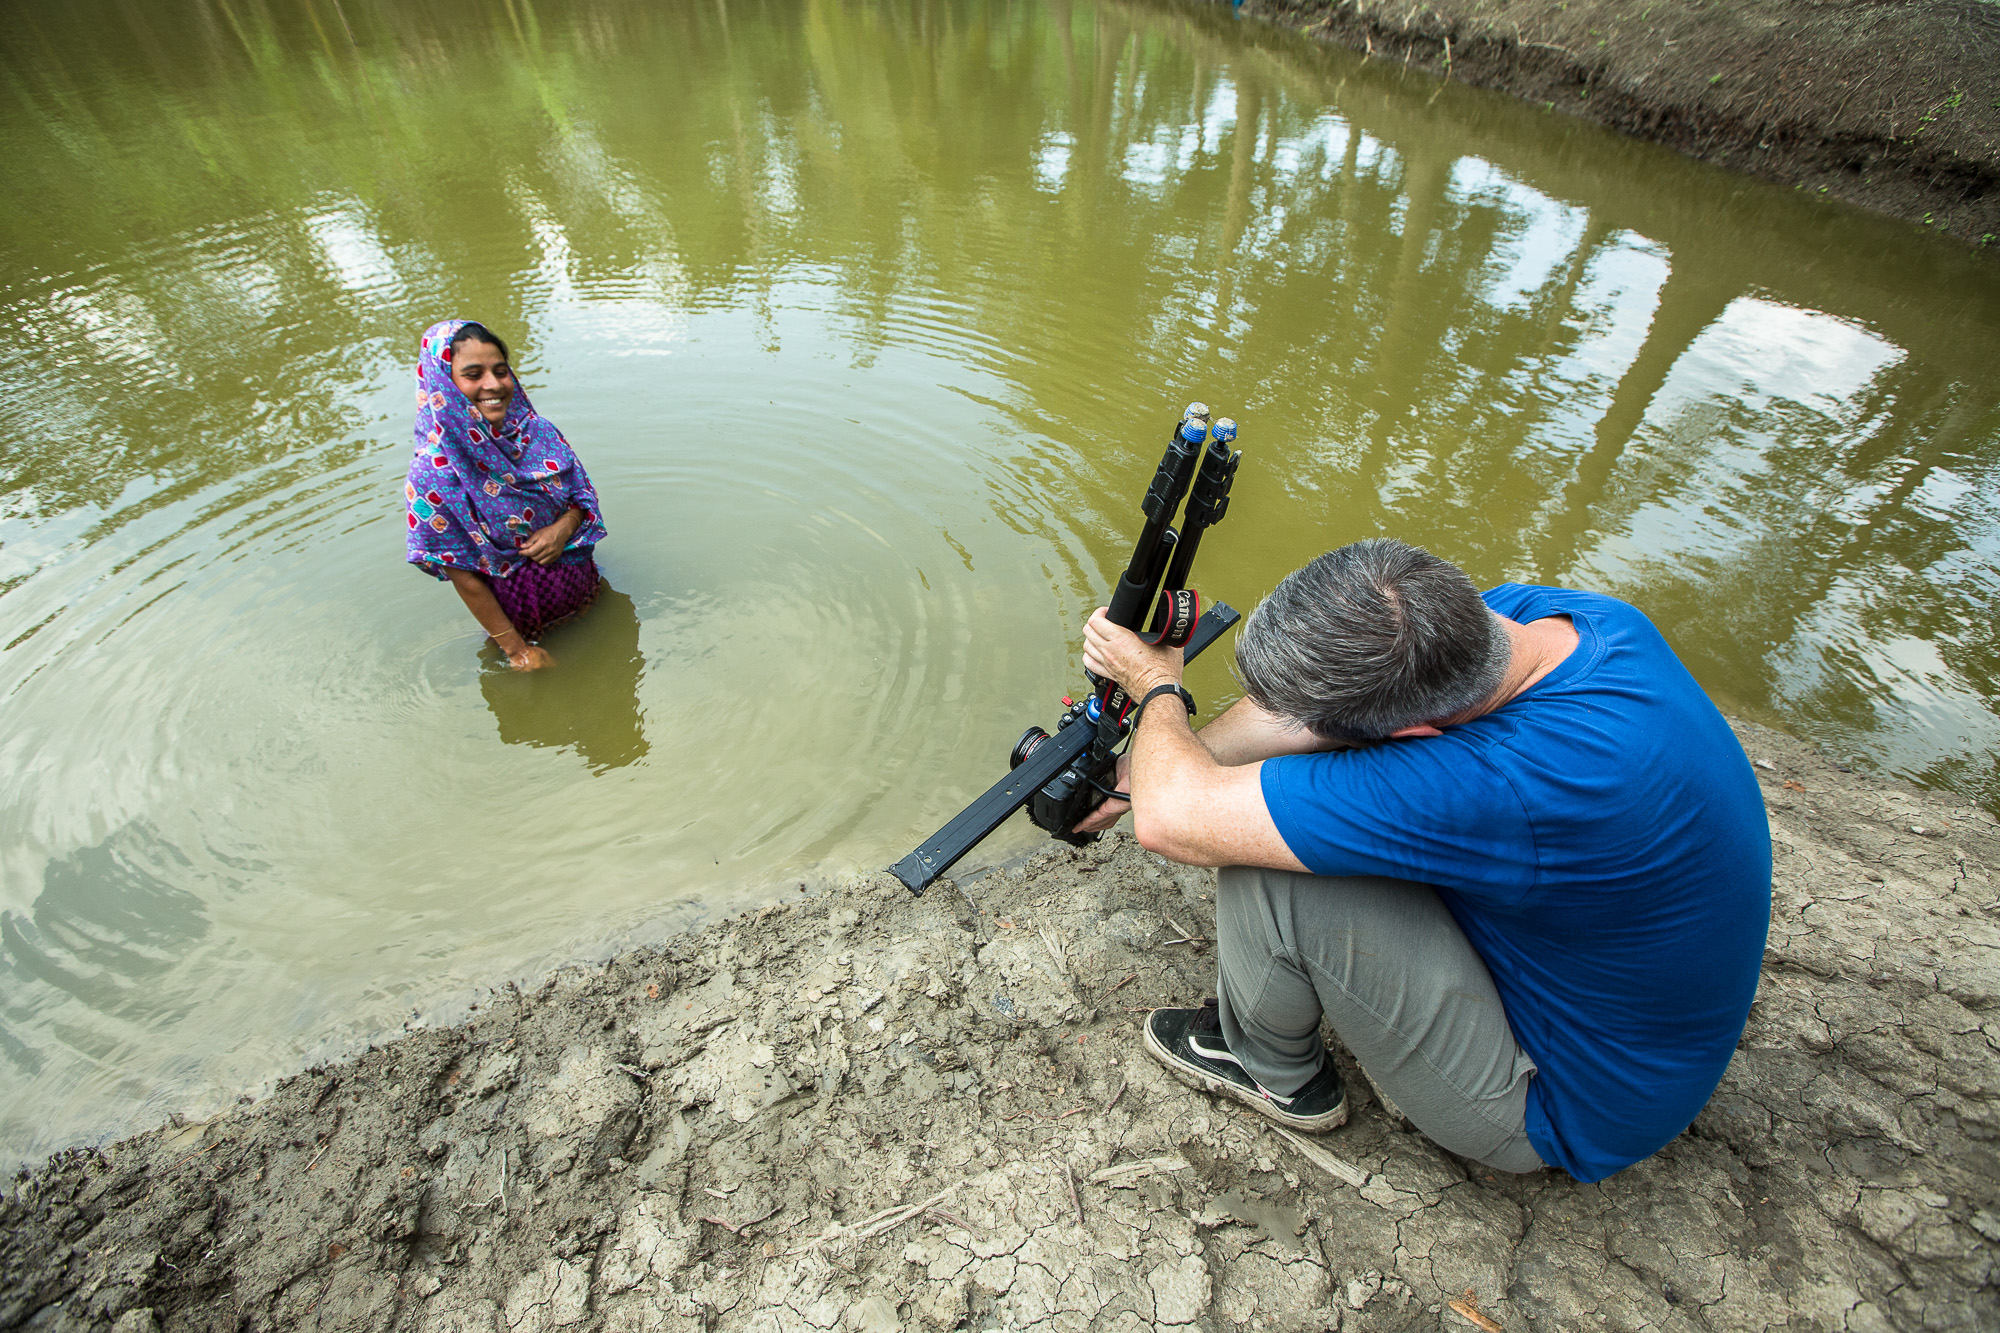  BALOVADROPUR, BANGLADESH: May 14, 2016 -  Ruma Begum, her husband and their son live in Balovadrapur village of Morelgonj Upazilla of Bagerhat District in Southern Bangladesh. They own 20 decimals of land (.2 acres) where they raise fish in 3 ponds 